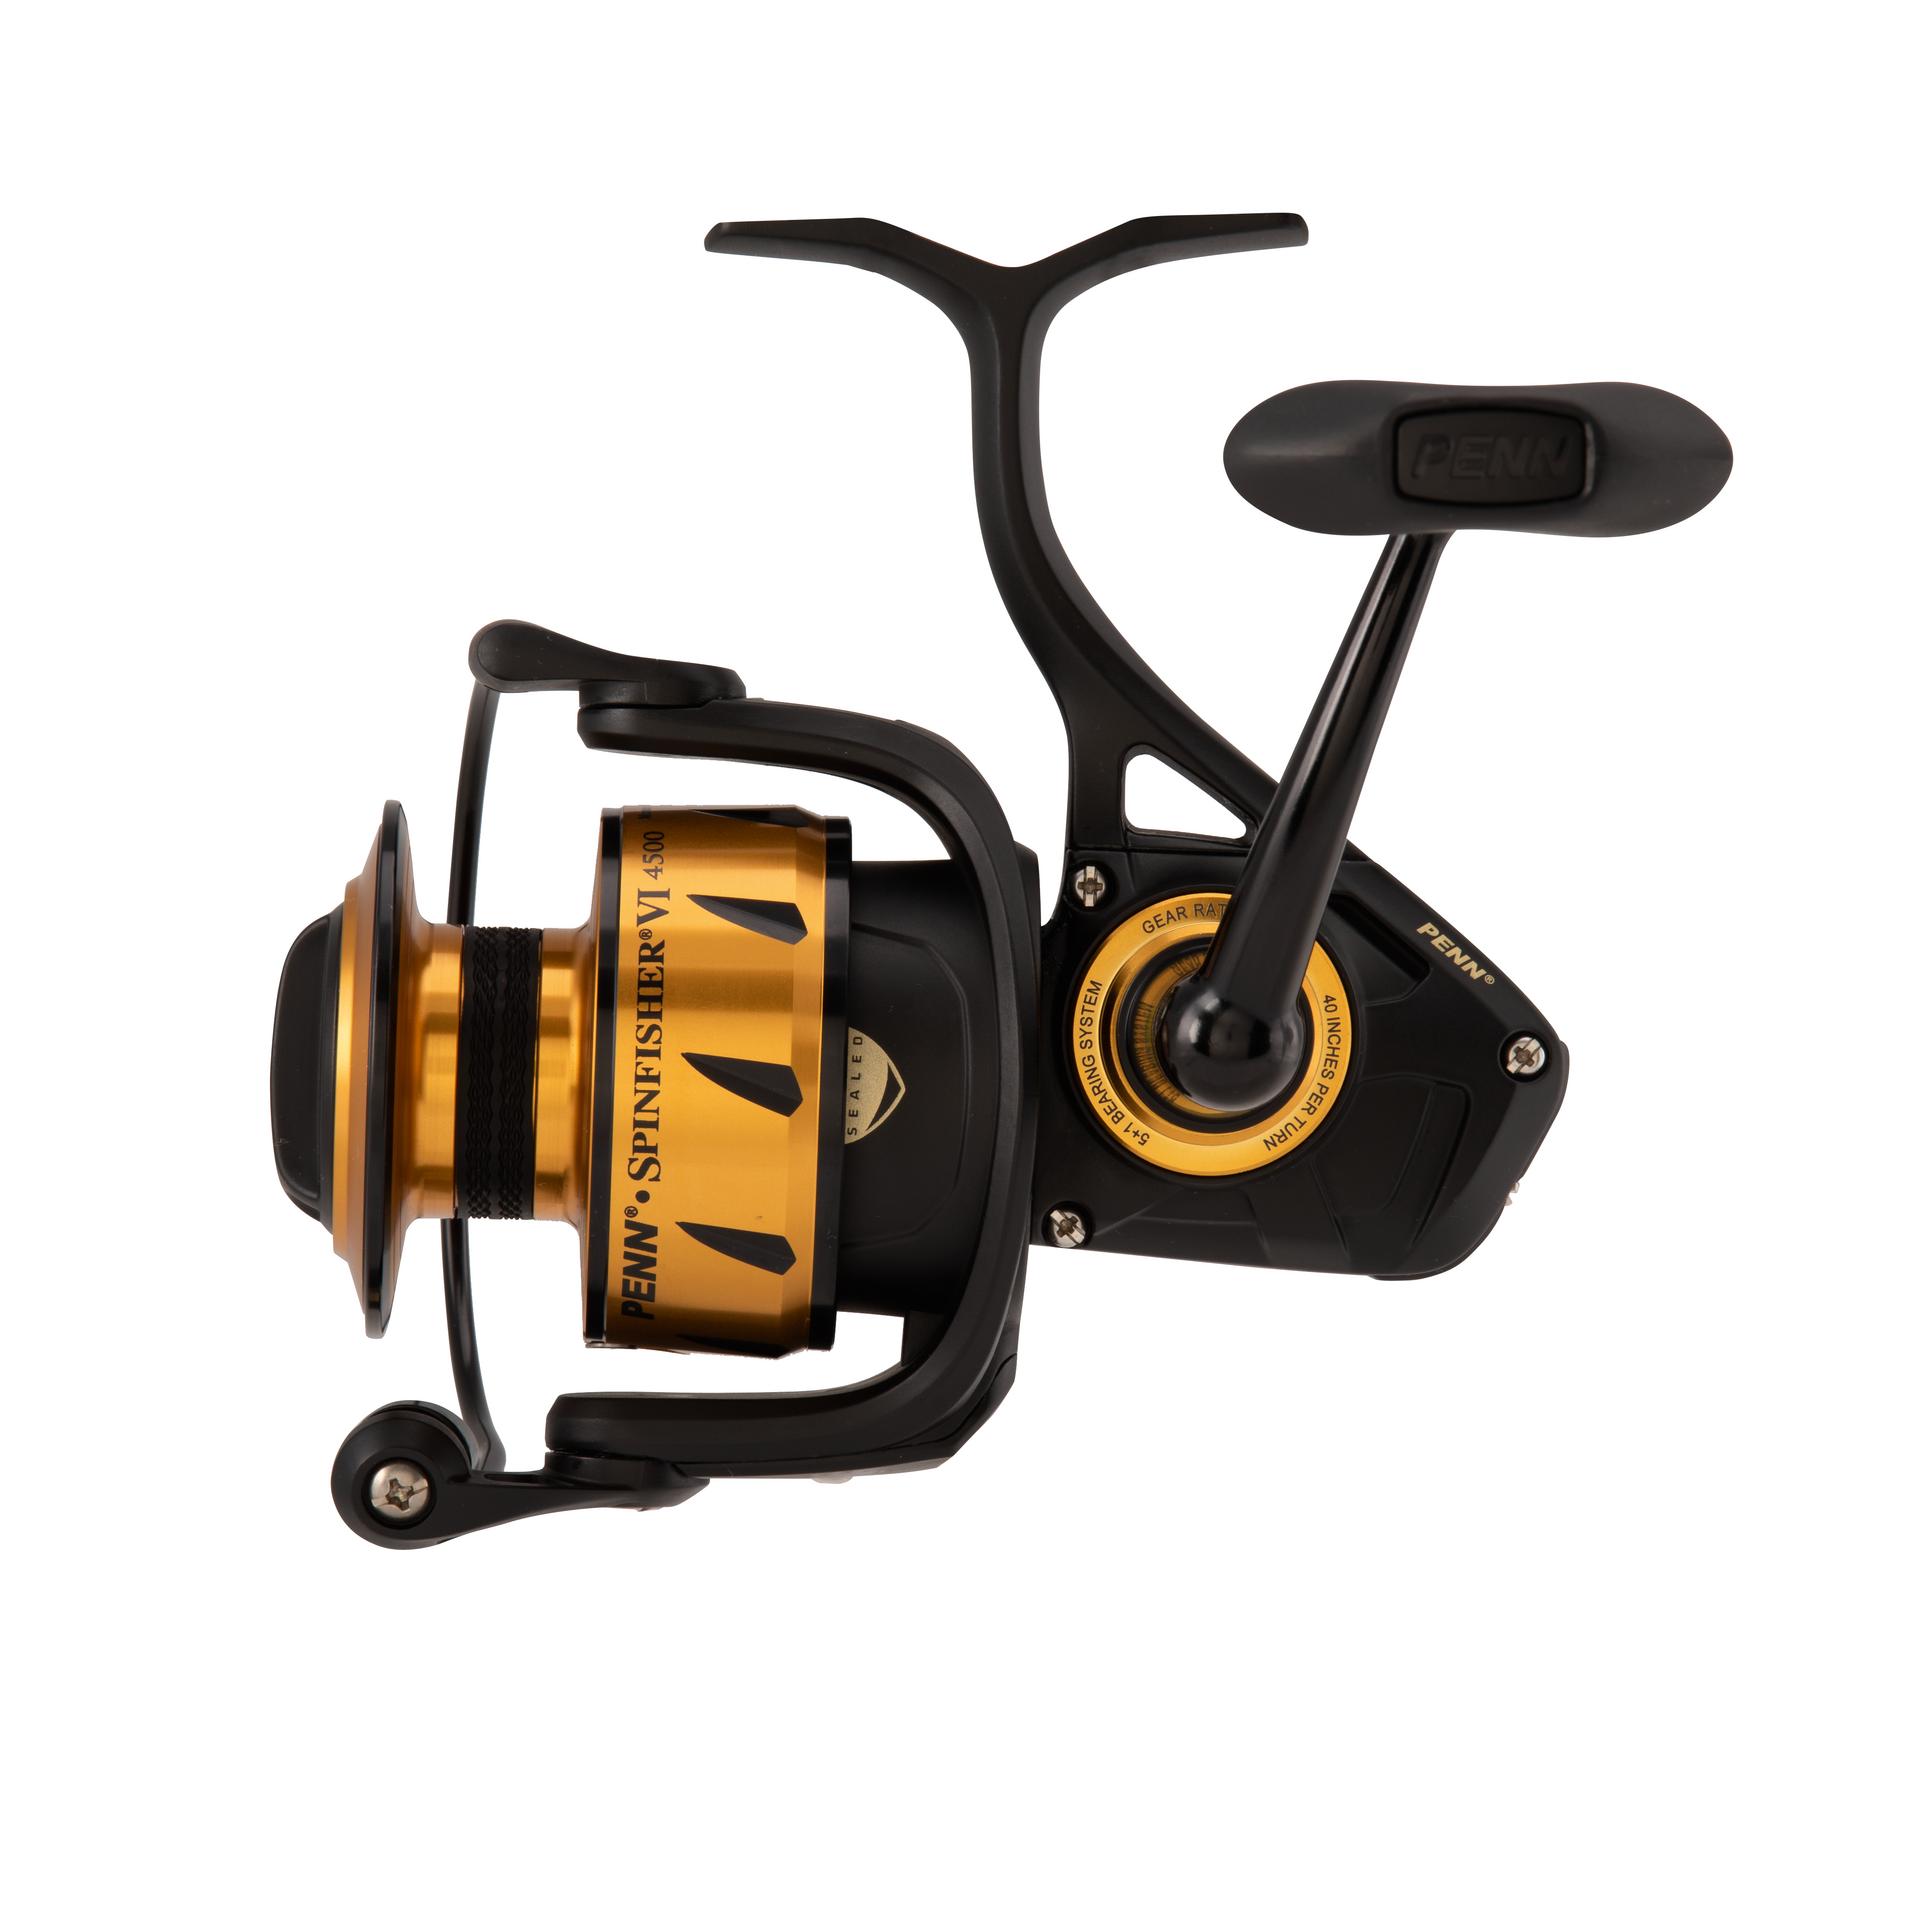  Penn Spinning Reel Part 15-SSV3500 Spinfisher SSV 3500 4500 (1)  Handle Assembly : Sports & Outdoors